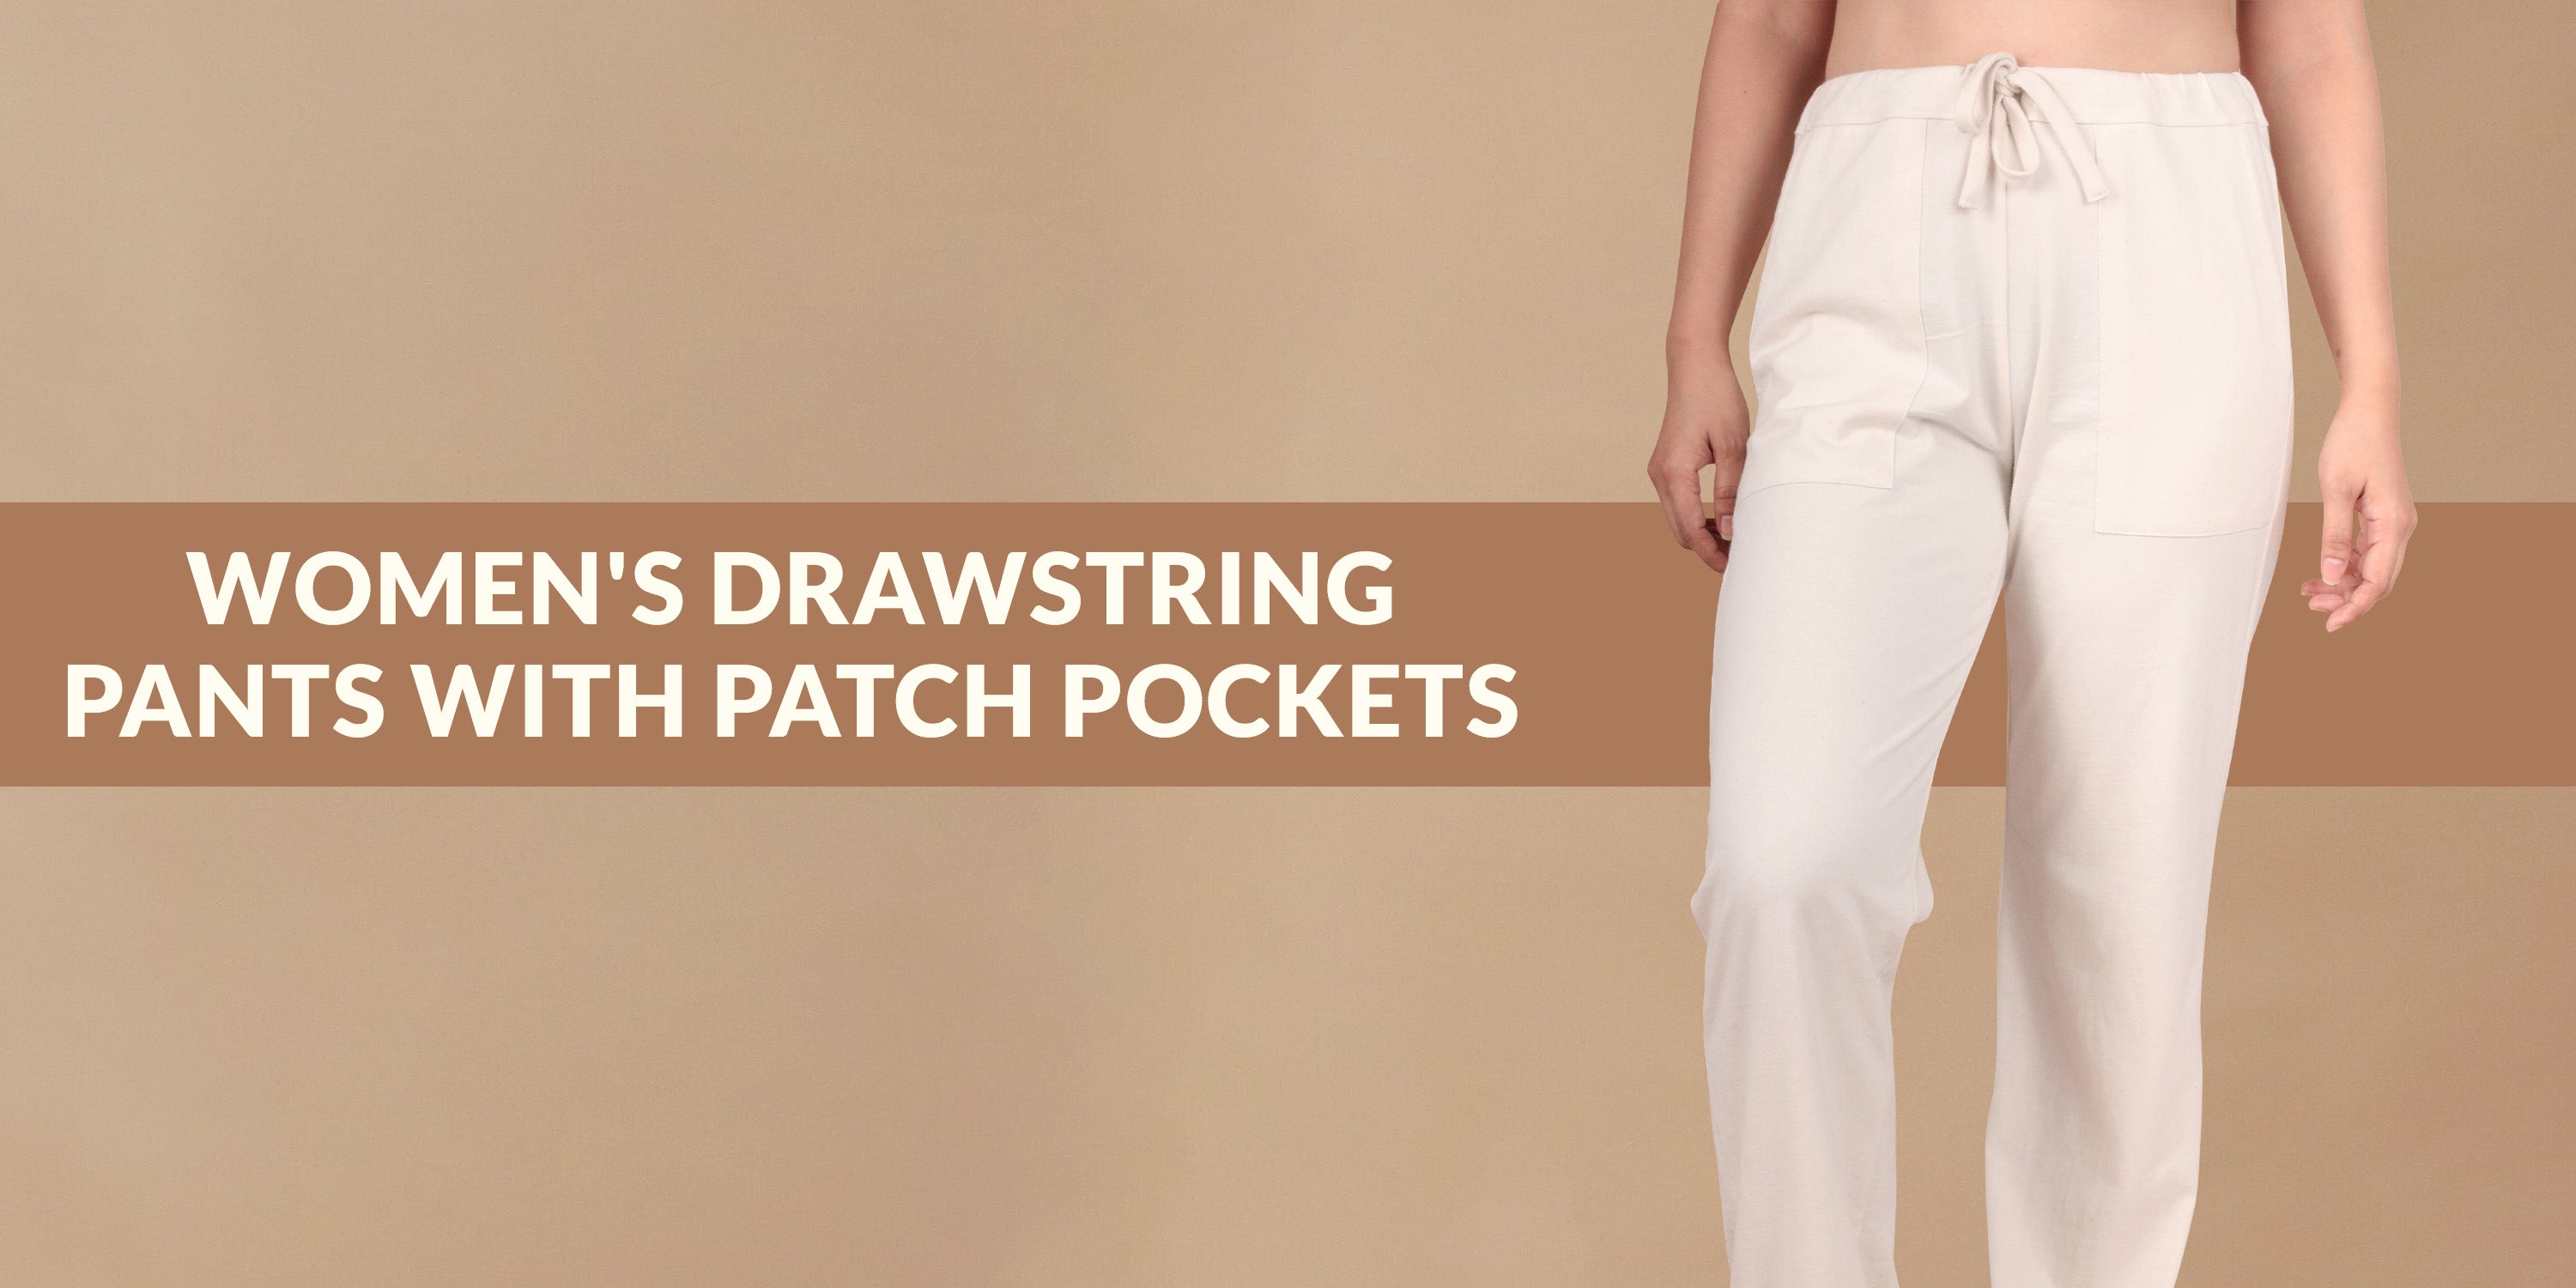 hypoallergenic drawstring pants with patch pockets for women